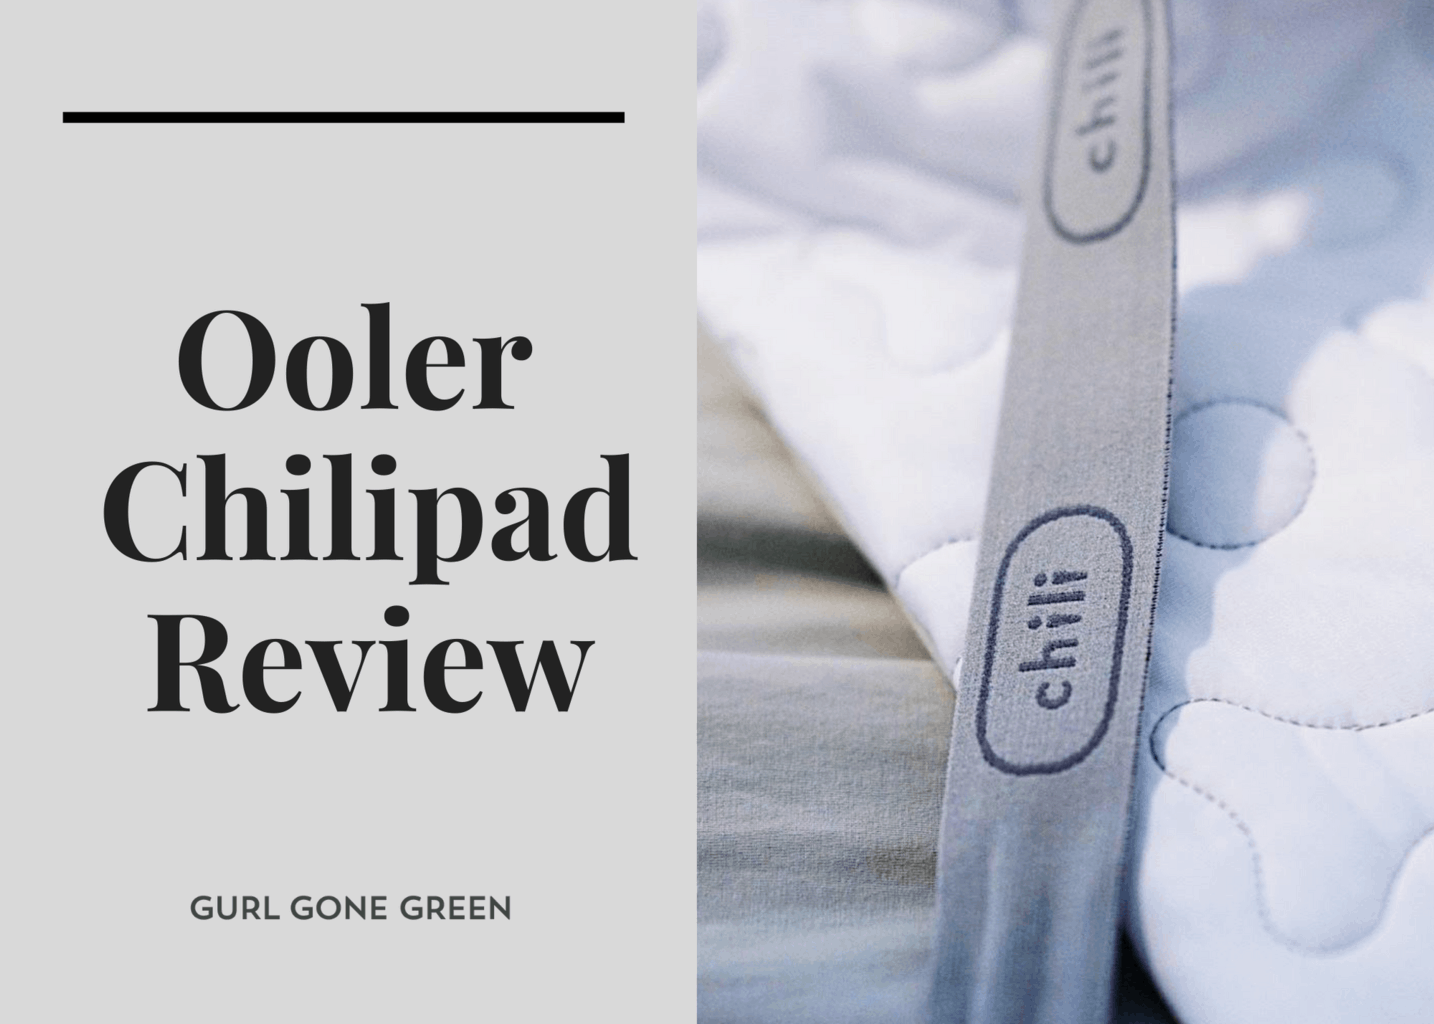 {review} - CHILIPAD| CUBE| MATTRESS| TEMPERATURE| WATER| SLEEP| BED| SYSTEM| PAD| OOLER| REVIEW| CONTROL| UNIT| NIGHT| TECHNOLOGY| PRODUCT| NOISE| PRODUCTS| TIME| DEGREES| AIR| DEVICE| CHILISLEEP| SIDE| PRICE| REVIEWS| SLEEPERS| BODY| ROOM| COOLING| KING| WARRANTY| CUSTOMERS| BEDJET| PEOPLE| TUBES| WAY| POD| SHEETS| CHILI| CHILIPAD CUBE| MATTRESS PAD| CONTROL UNIT| DISTILLED WATER| CHILIPAD SLEEP SYSTEM| SLEEP POD| CUBE SLEEP SYSTEM| CHILI TECHNOLOGY| REMOTE CONTROL| OOLER SLEEP SYSTEM| CHILISLEEP REVIEW| WATER TANK| SLEEP SYSTEM| CHILIPAD REVIEW| DESIRED TEMPERATURE| PRO COVER| FITTED SHEET| HYDROGEN PEROXIDE| SLEEP TRIAL| SLEEP QUALITY| COOL MESH| MATTRESS PROTECTOR| COLD WATER| CHILIPAD SYSTEM| SLEEP SYSTEMS| MATTRESS PADS| WIRELESS REMOTE| ROOM TEMPERATURE| BODY TEMPERATURE| POD PRO